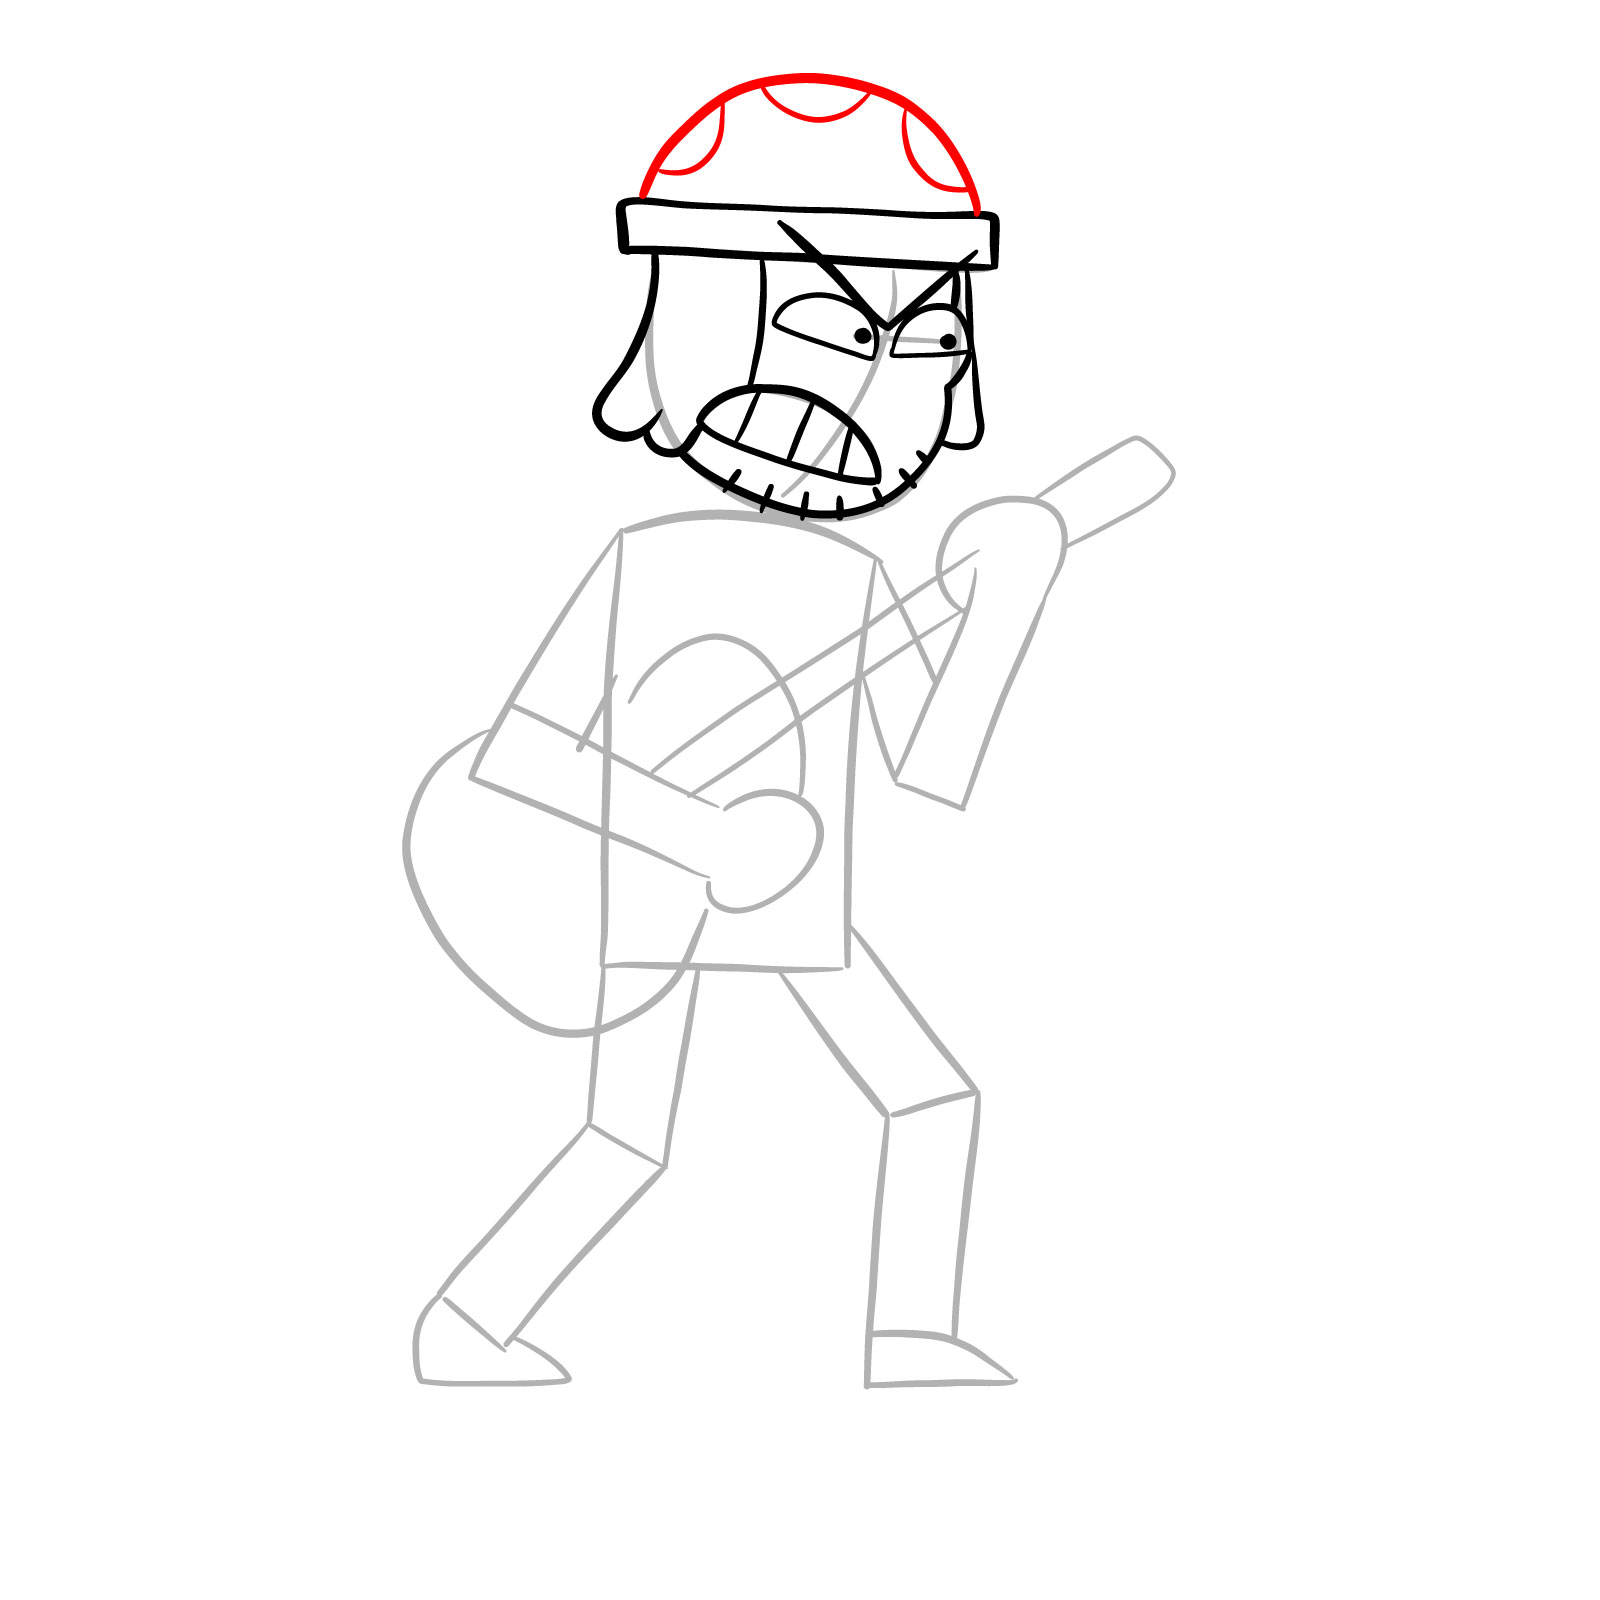 How to draw Suction Cup Man with a guitar - step 11